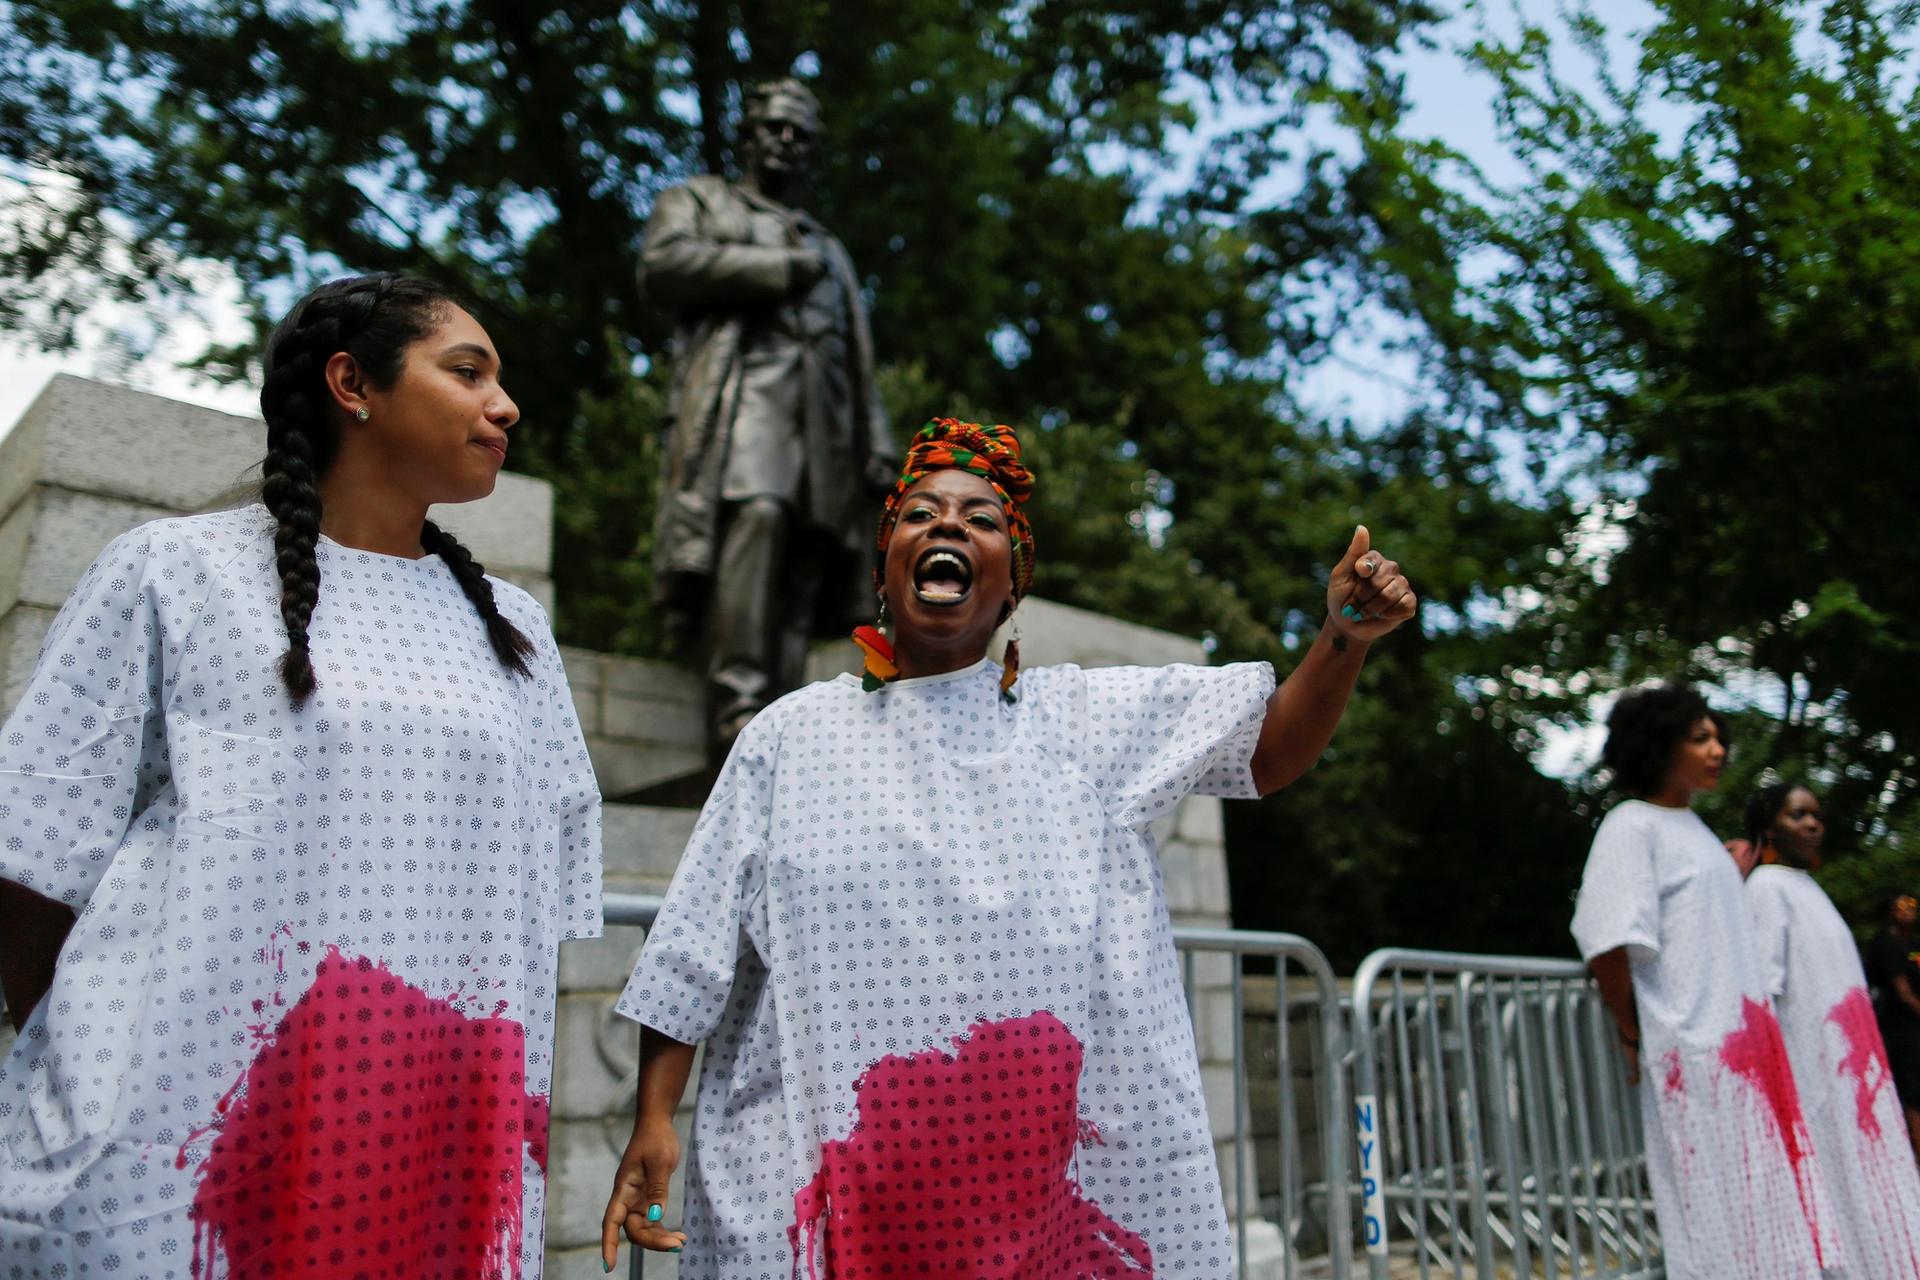 Women from Black Youth Project 100 protest against white supremacy in front of a statue of J. Marion Sims in New York REUTERS/Eduardo Munoz